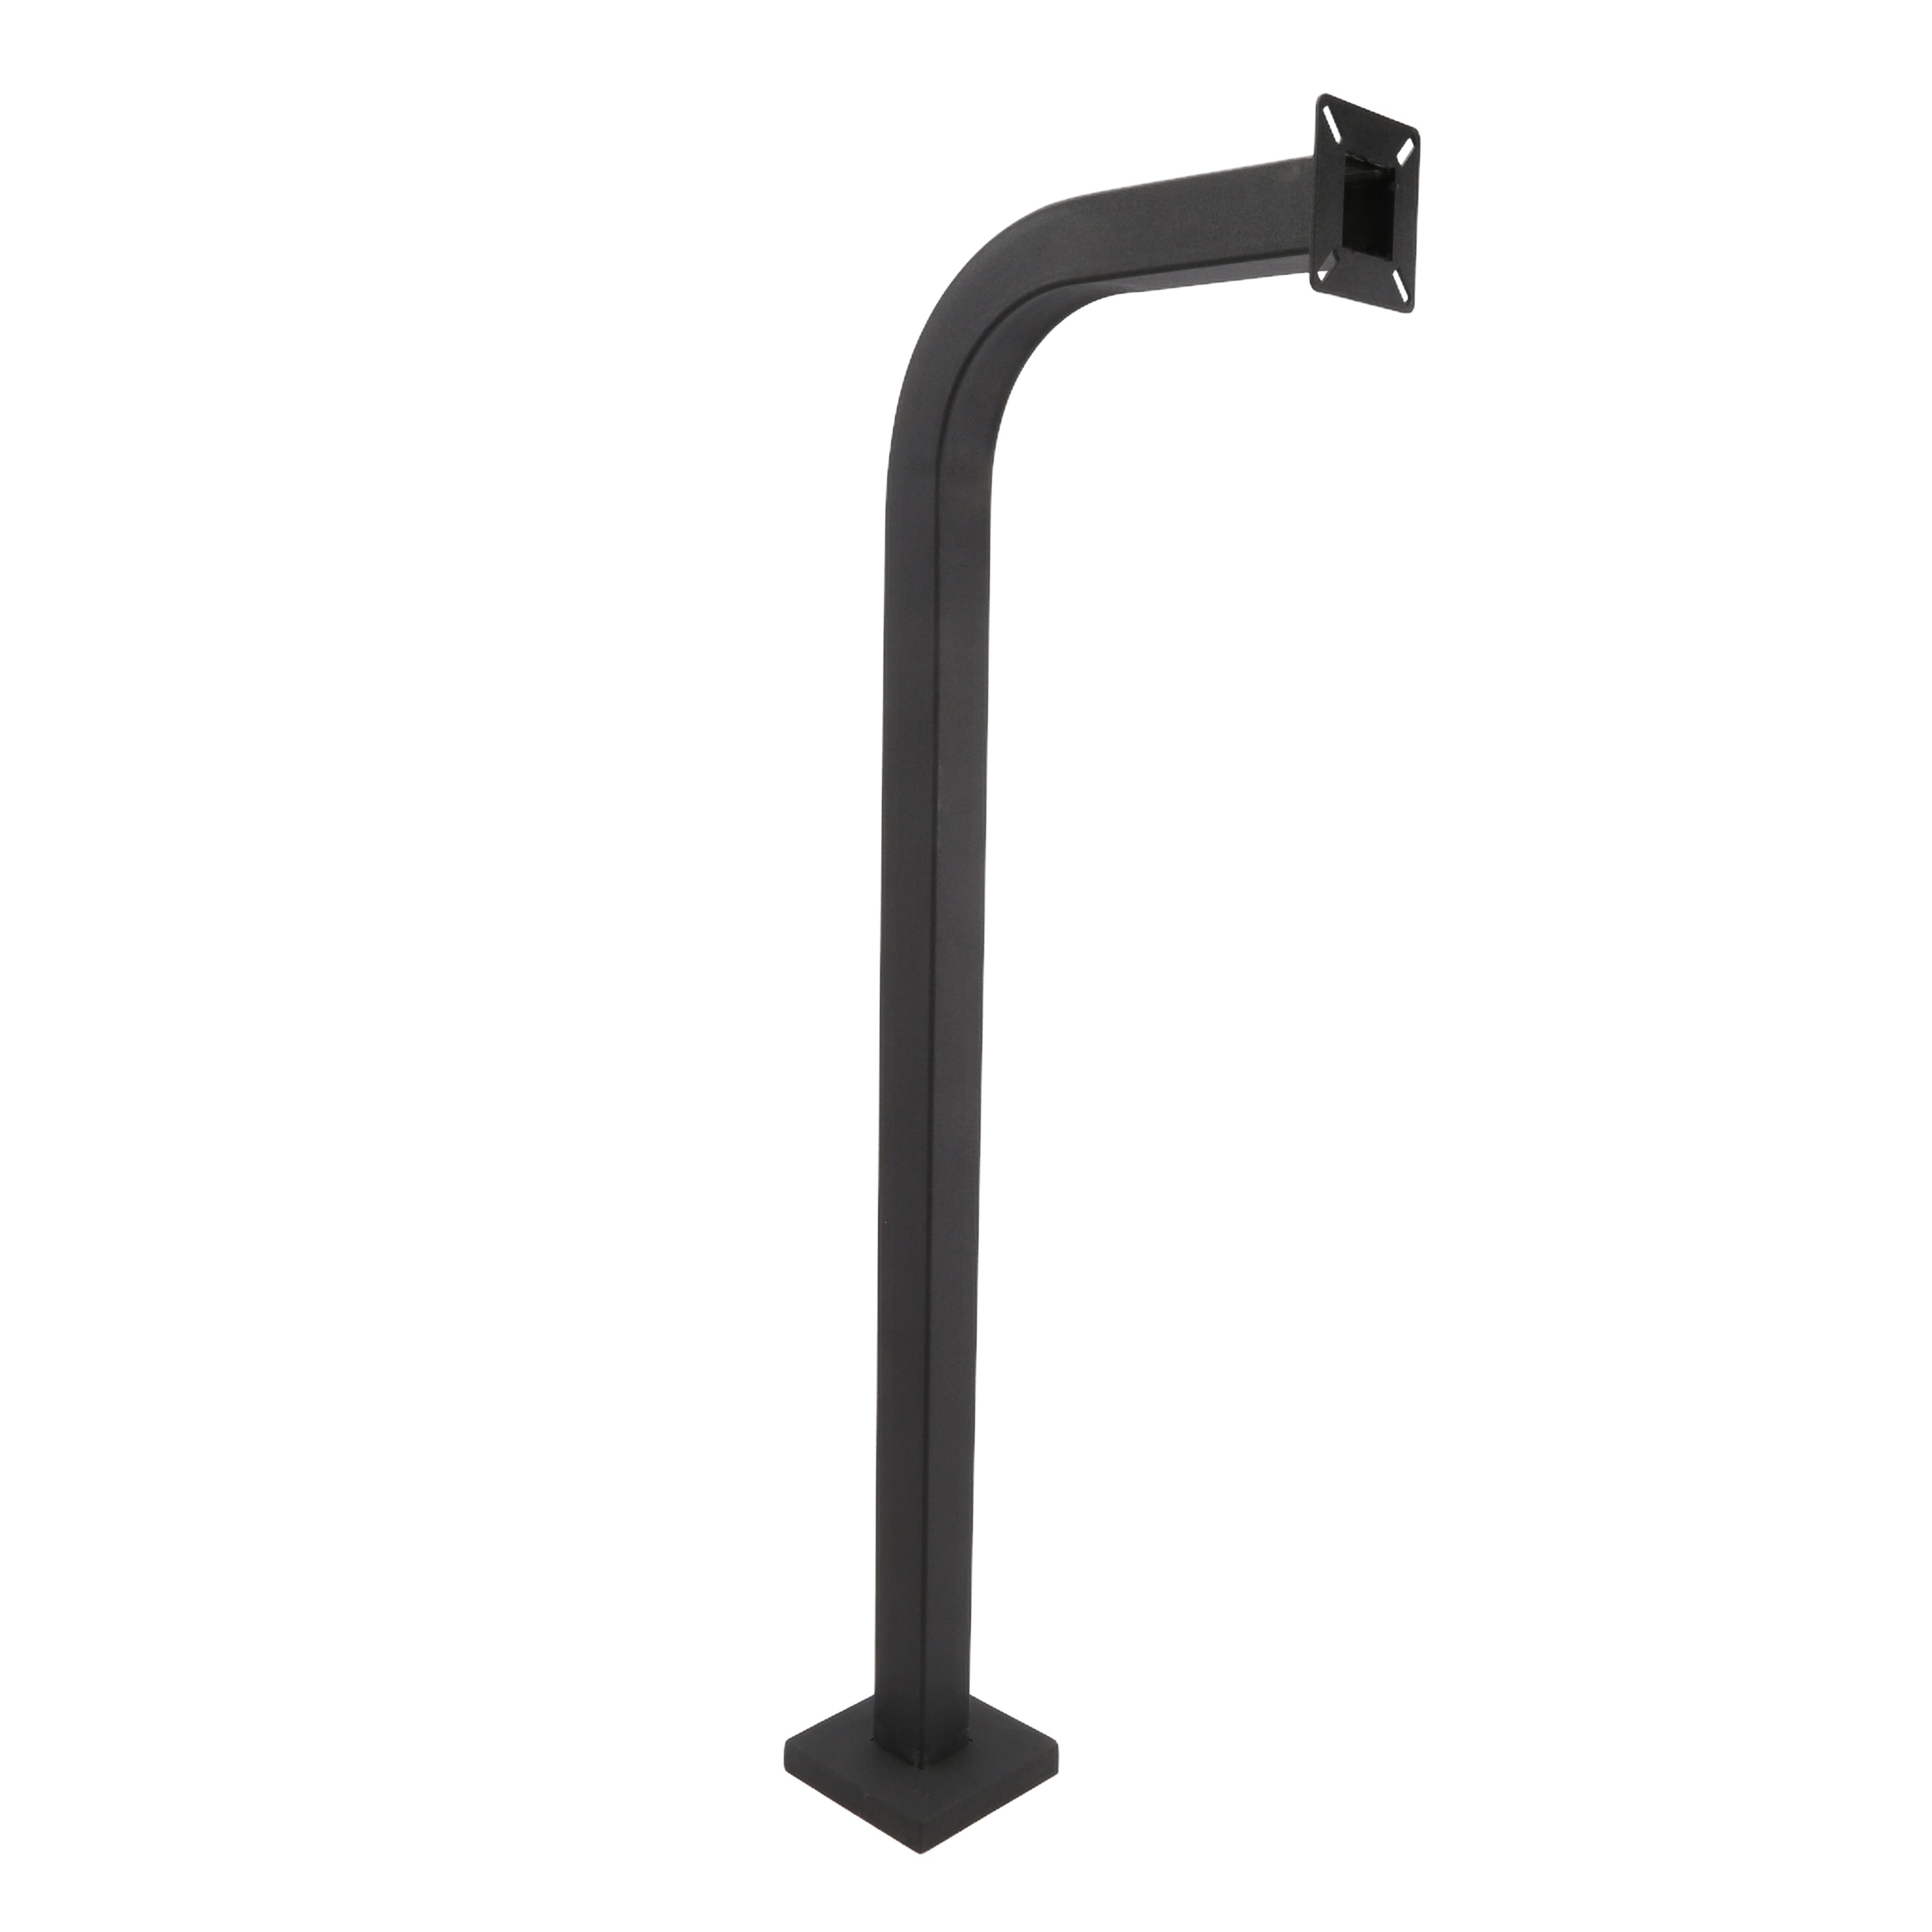 USAutomatic Gooseneck Pedestal 42 Tall - Commercial Grade Powder-Coated  Black (Pad Mount)